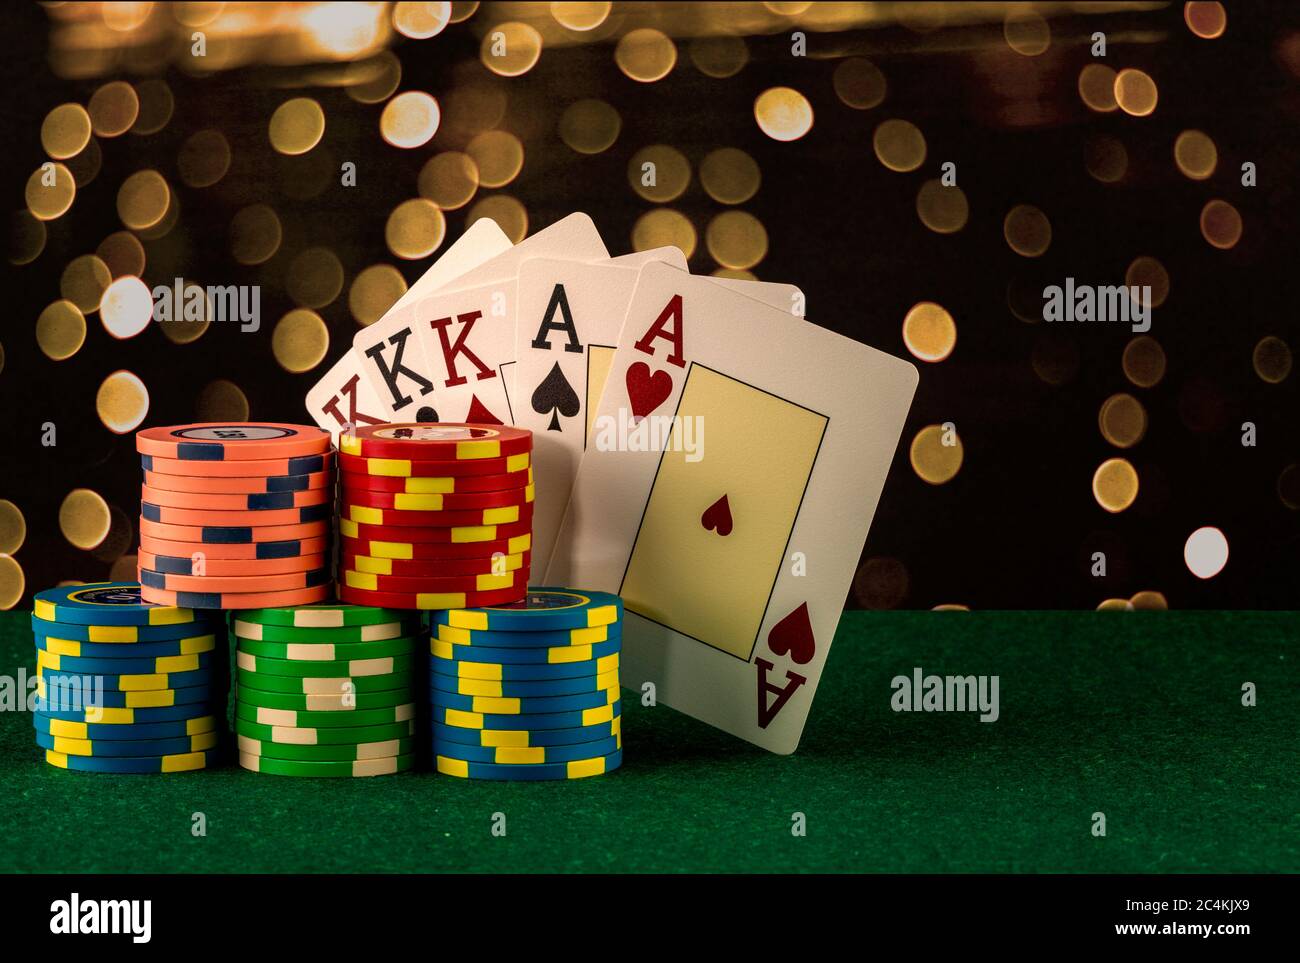 Casino game elements such as colored chips, poker cards and money Stock Photo